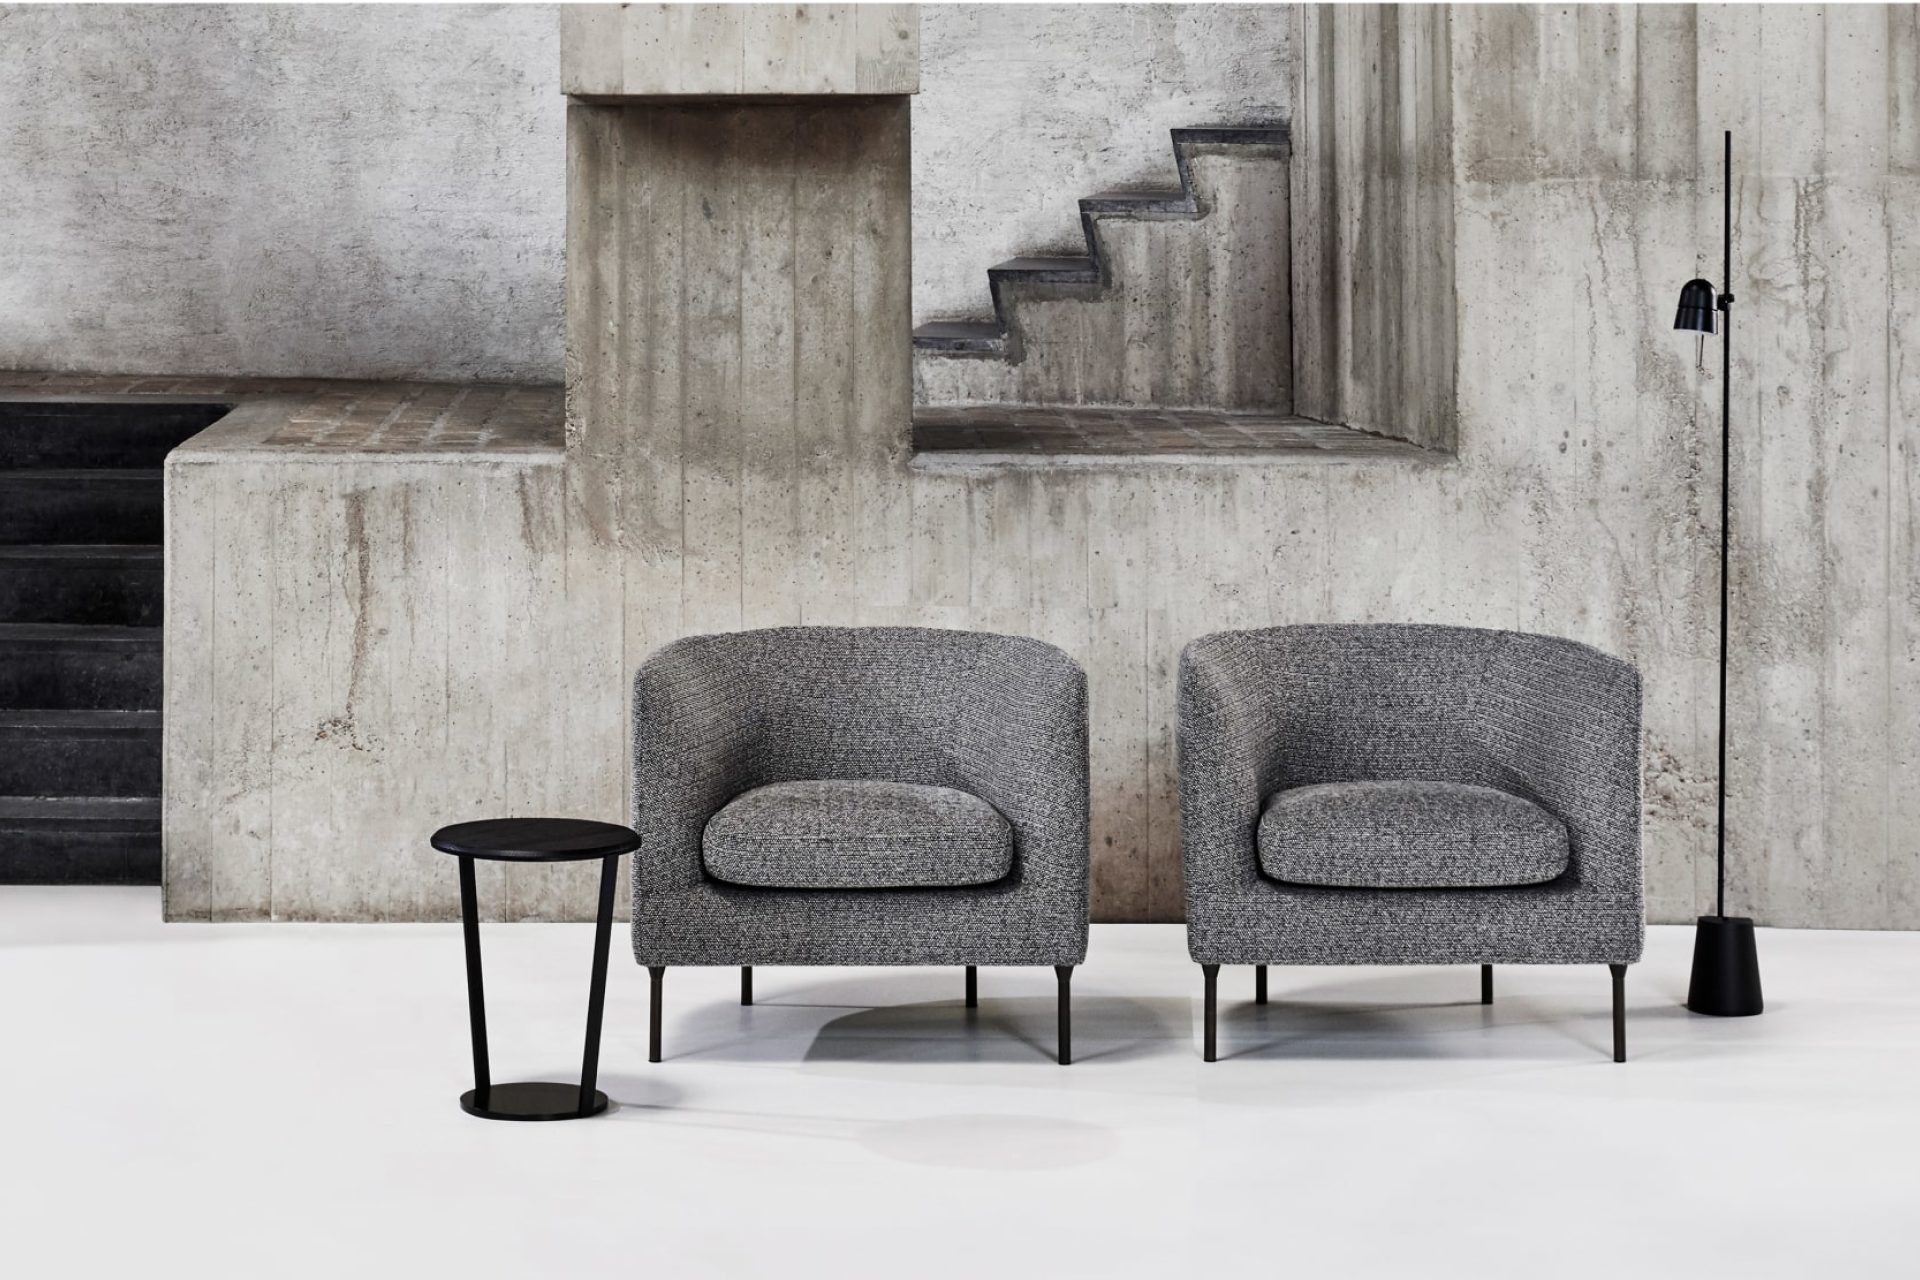 Two mottled-grey canvas armchairs with a removable cover